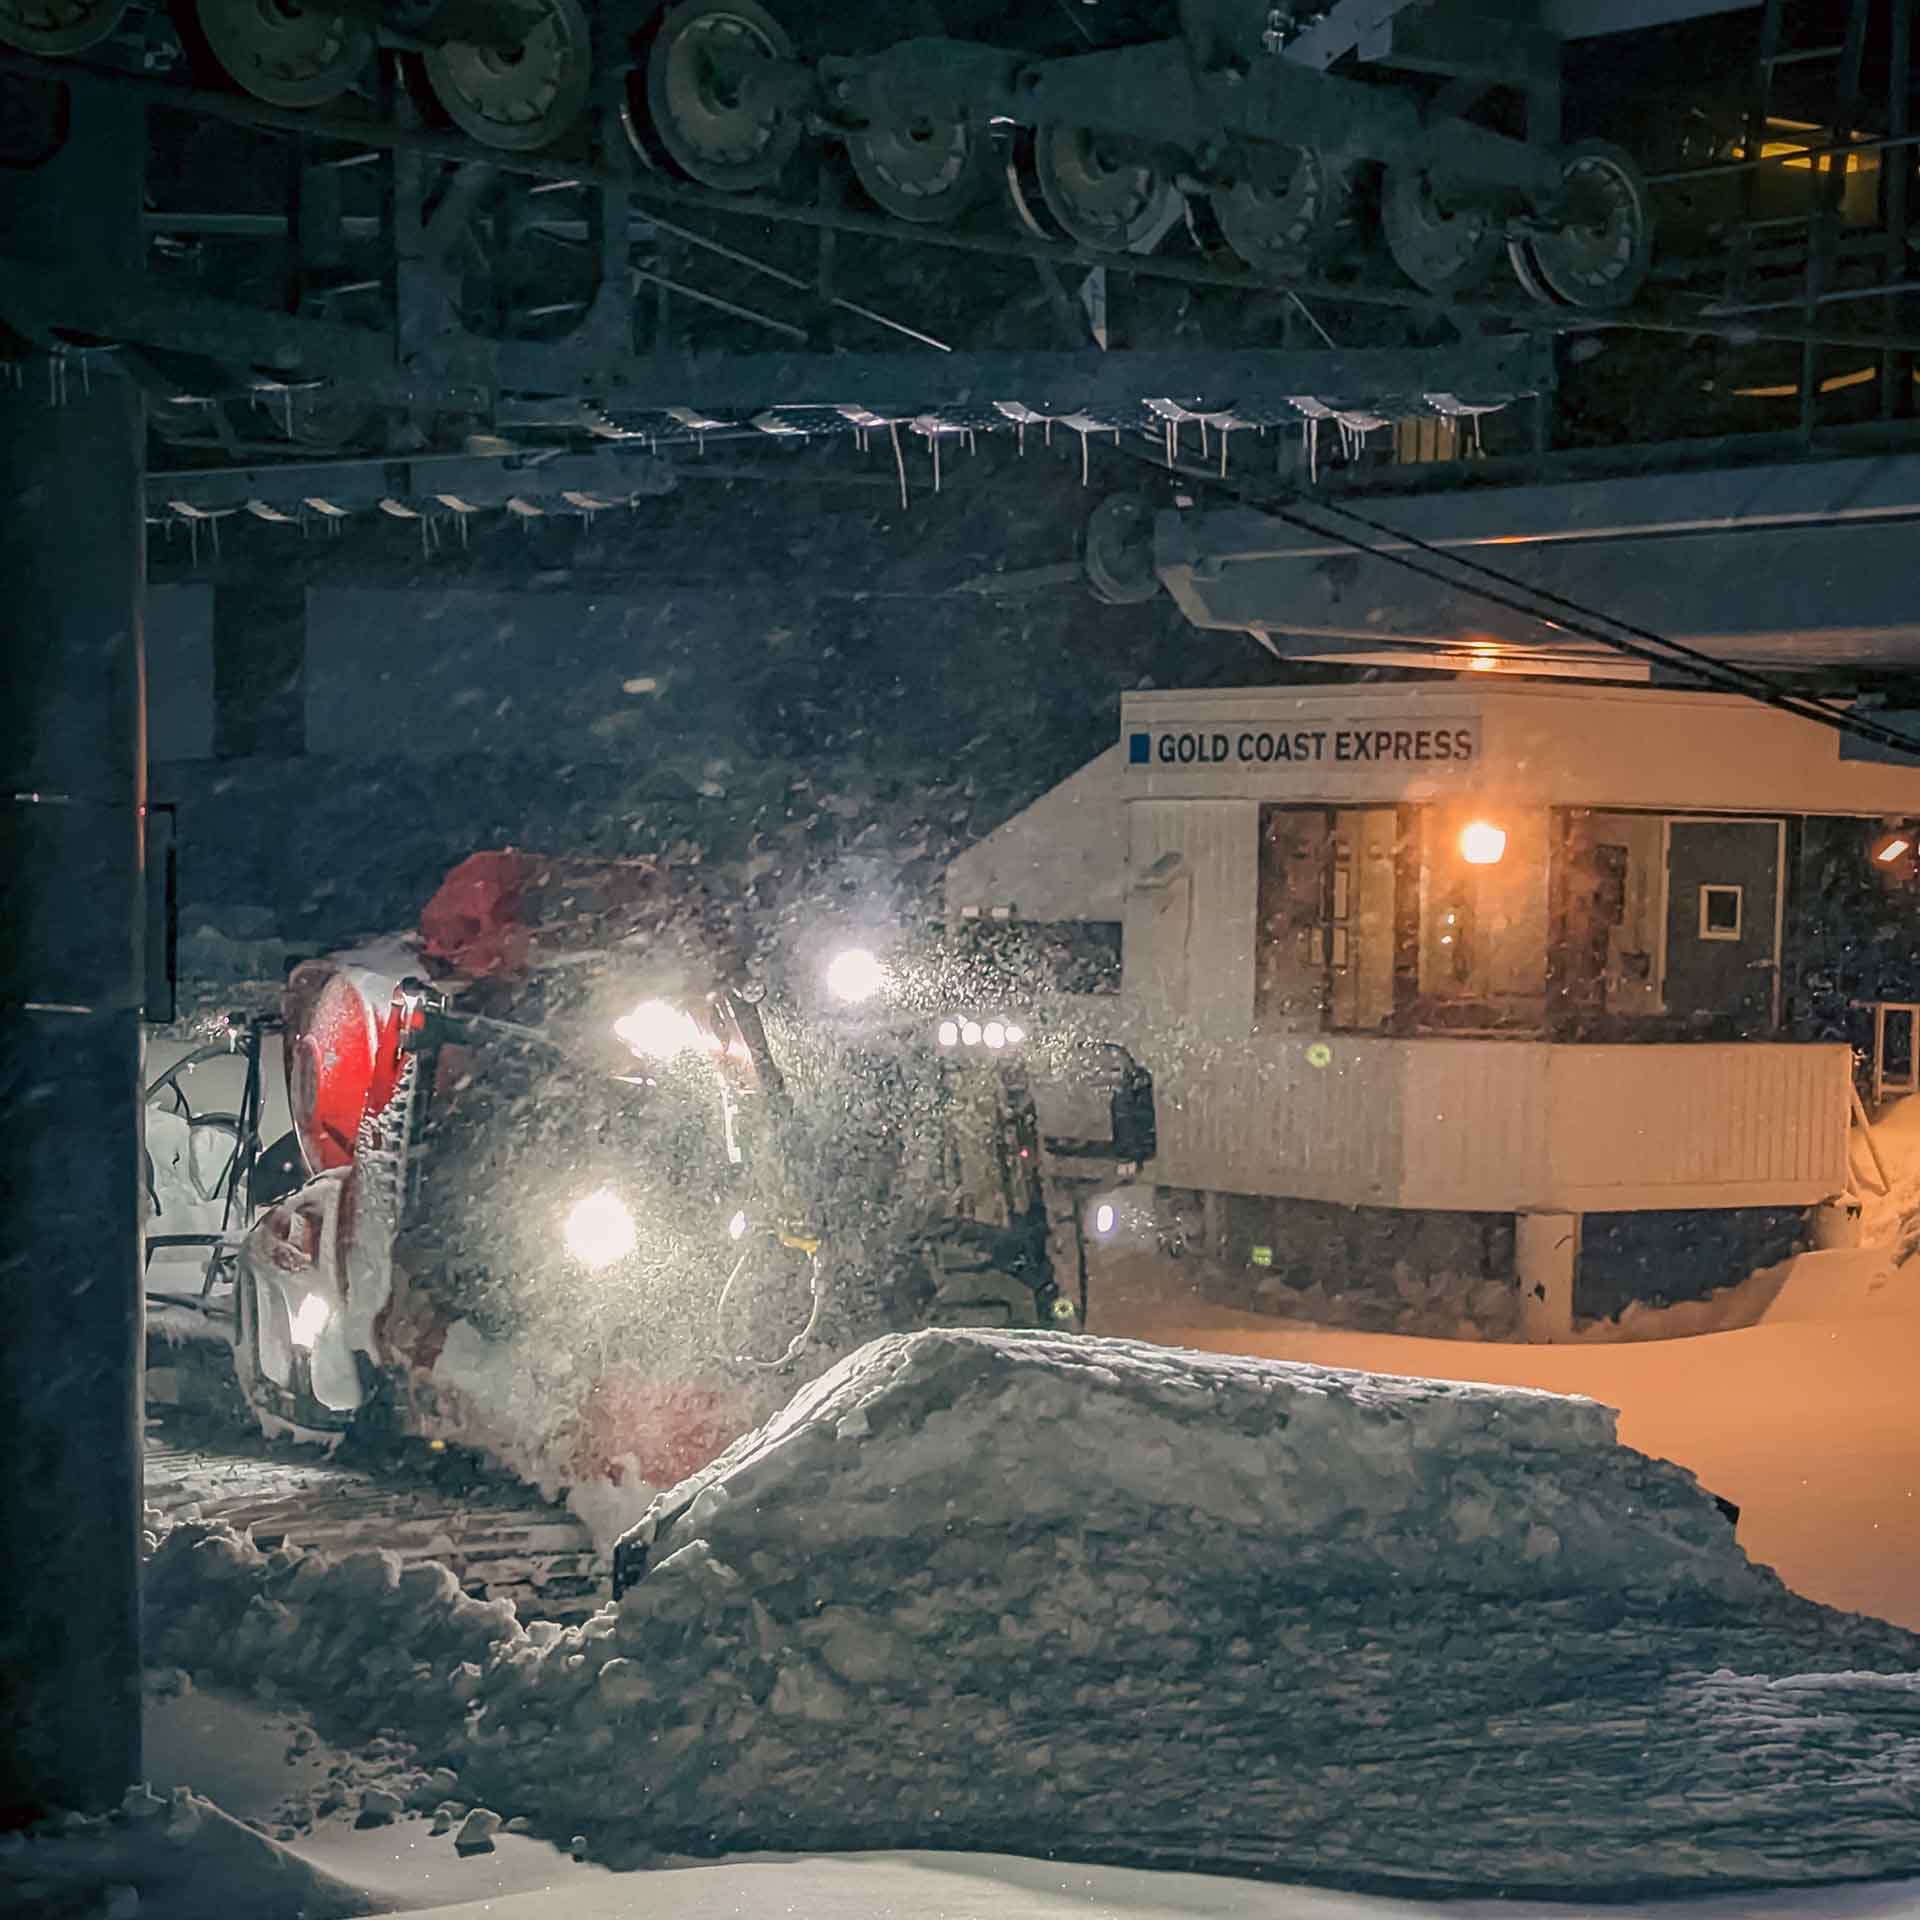 A snowcat digging out the Gold Coast chairlift.